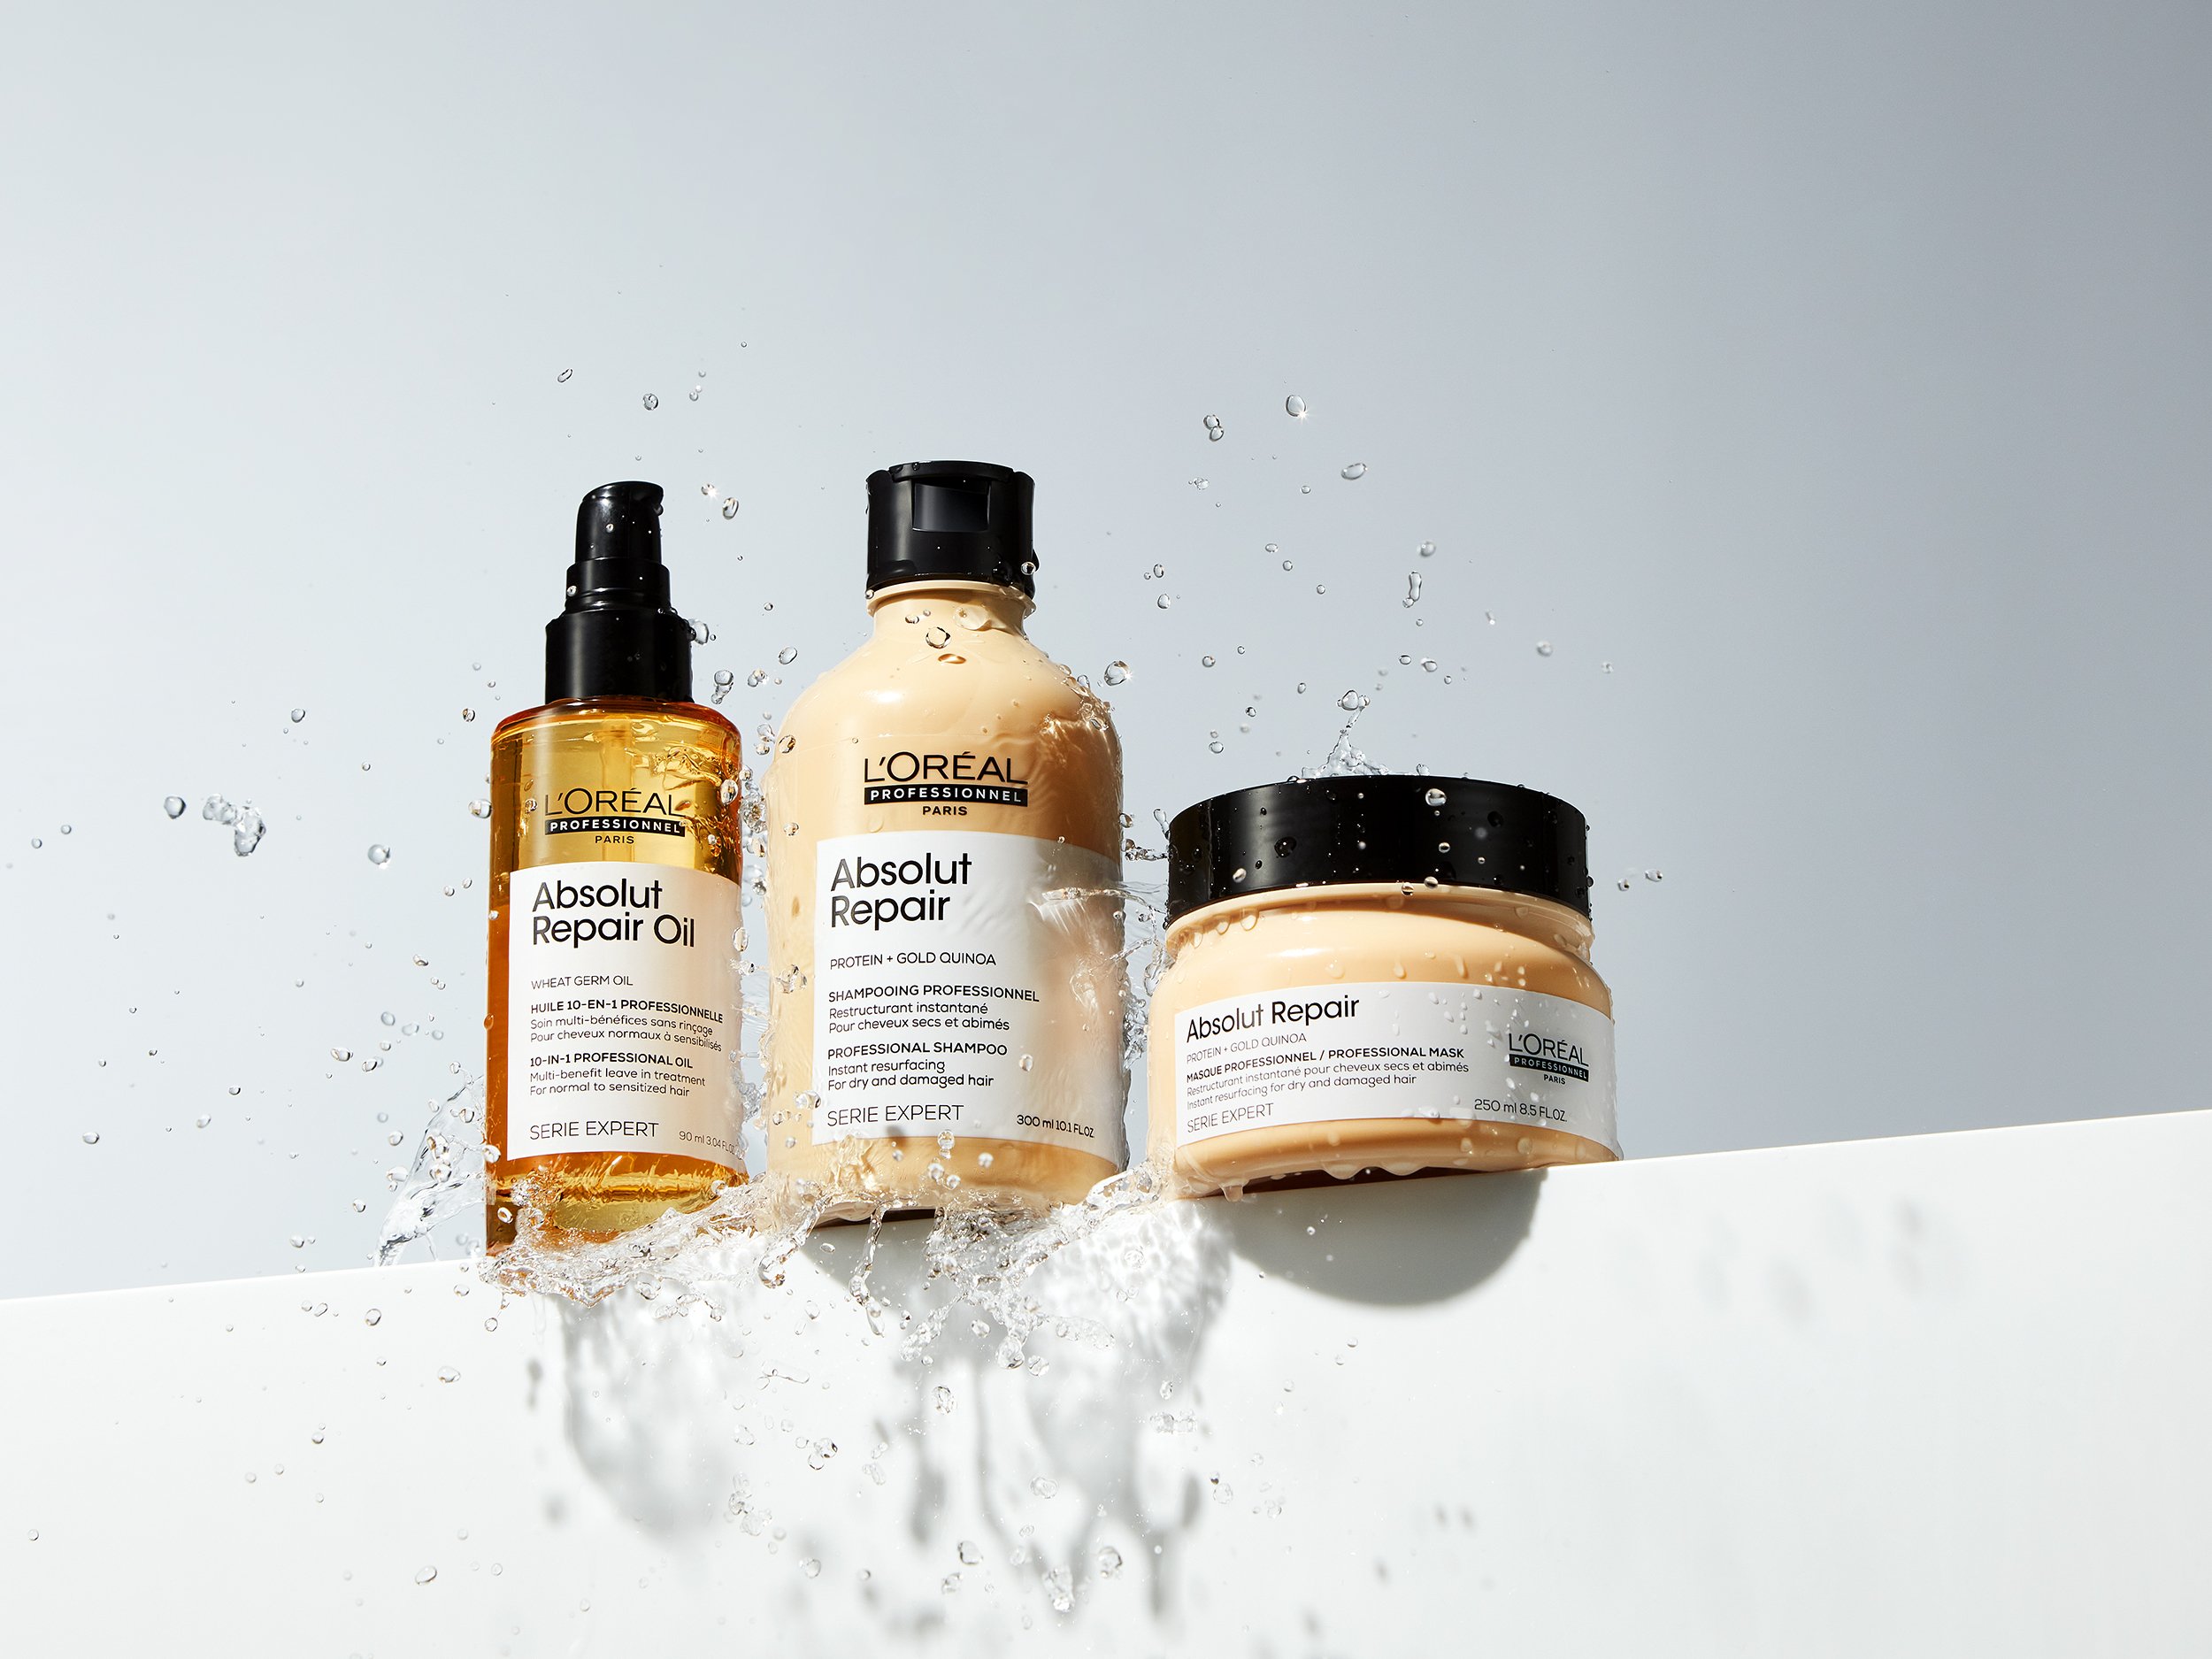 L'Oreal Absolut Repair haircare range photographed by Simon Lyle Ritchie